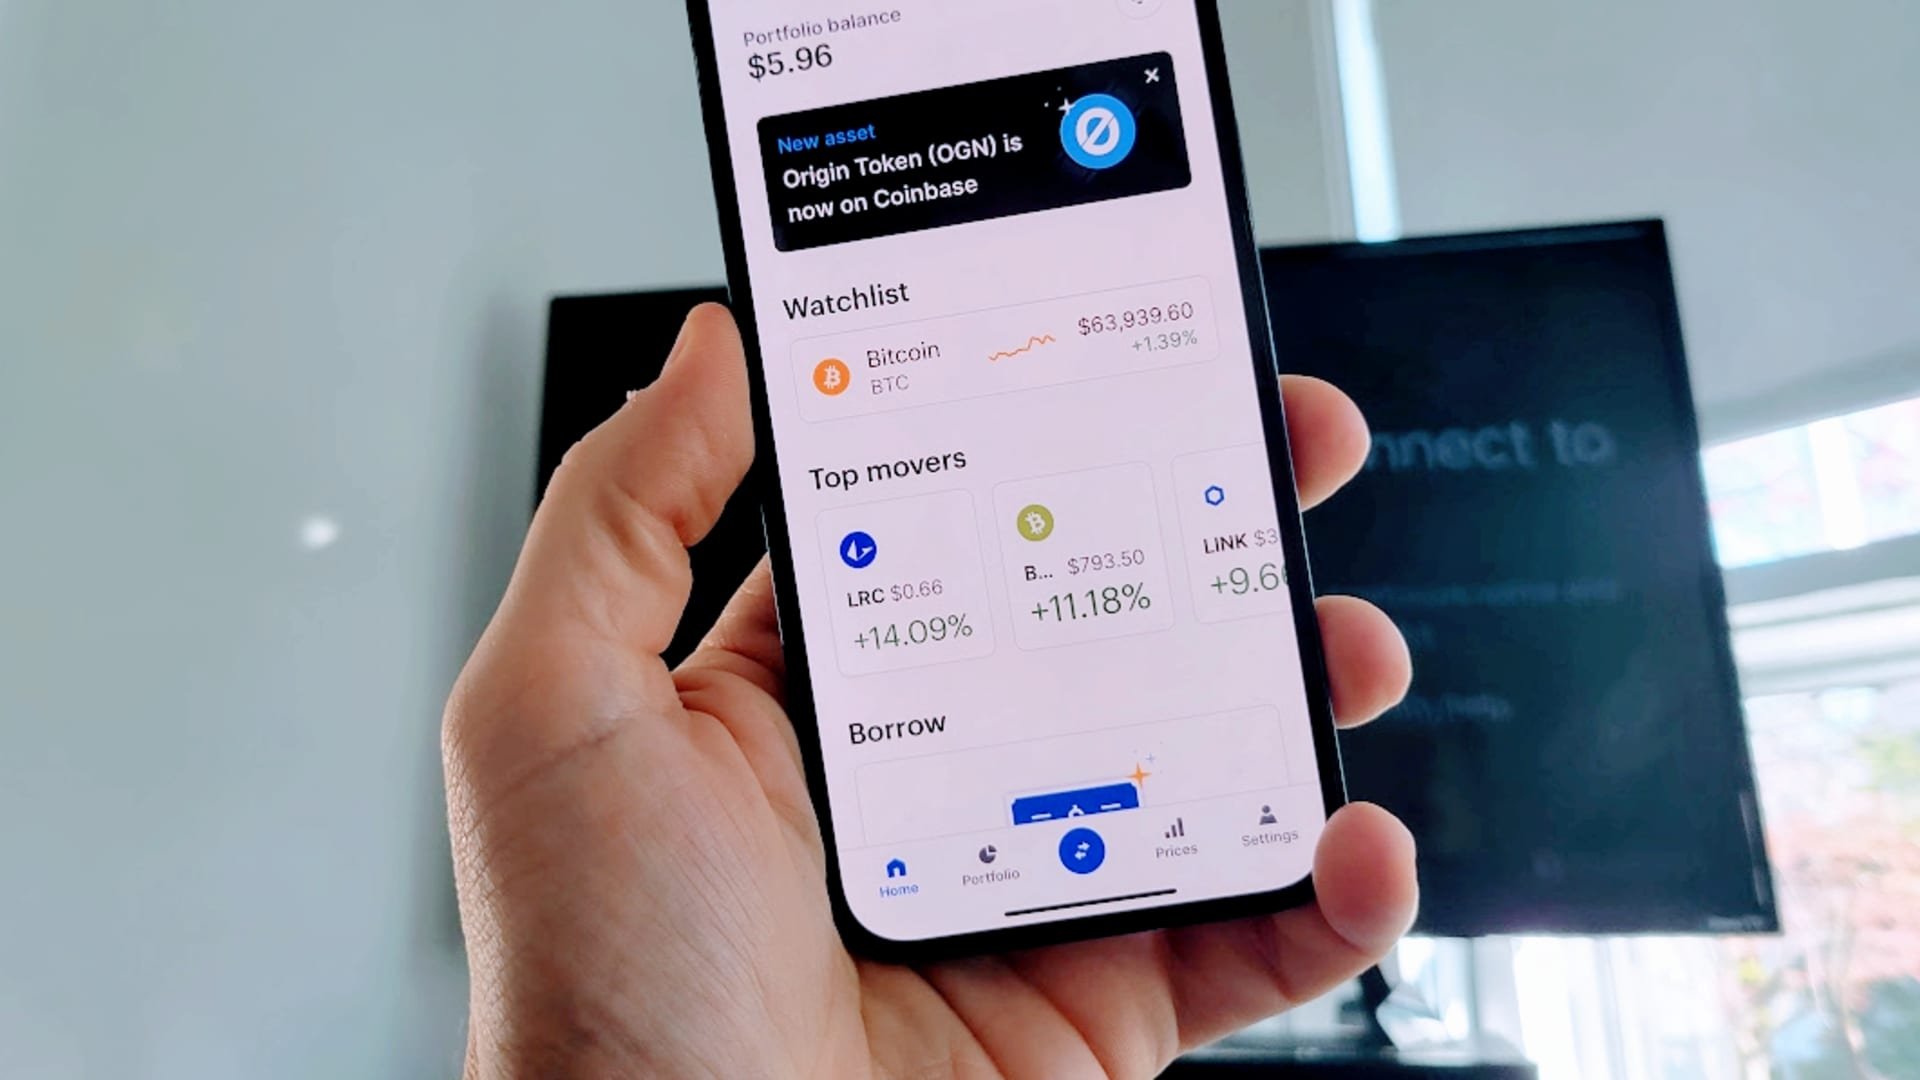 Here's what Coinbase is and how to use it to buy and sell cryptocurrencies